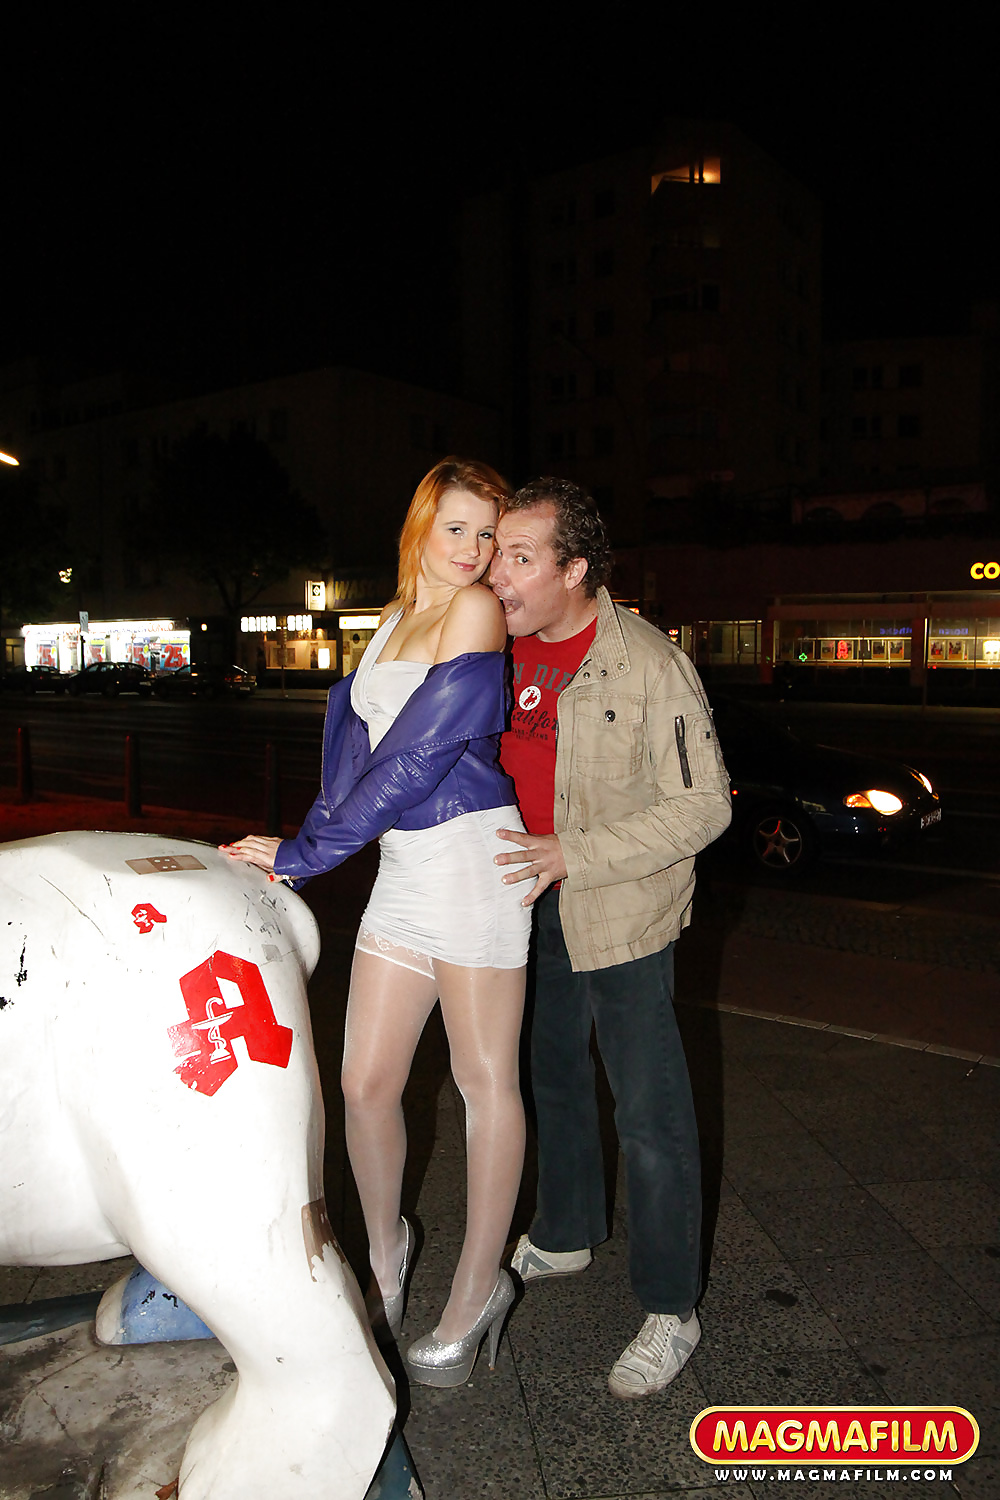 Magmafilm Redhead gets fucked on the street in public #30634854